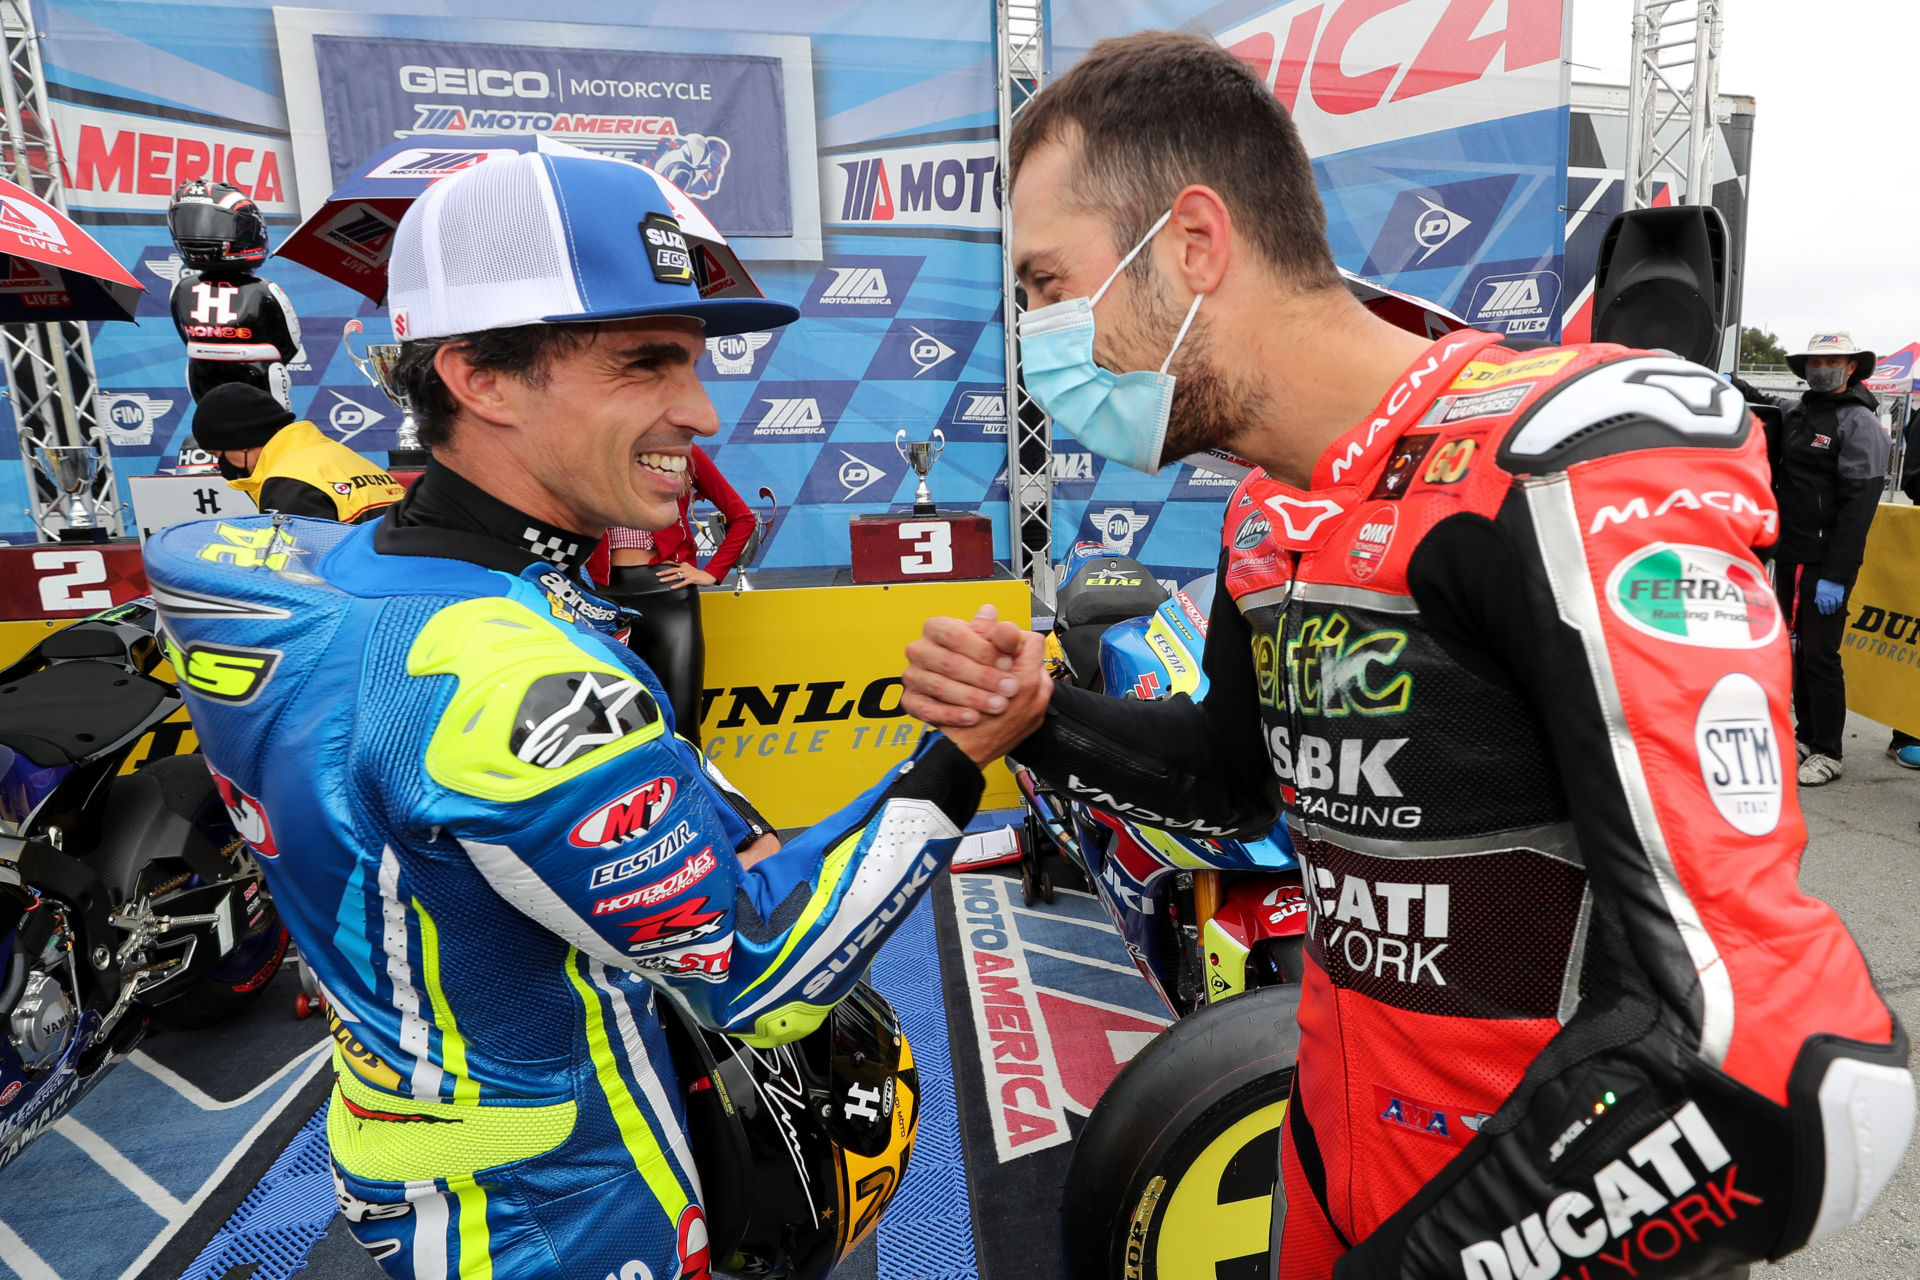 Toni Elias (left) shakes hands with Lorenzo Zanetti (right) after they finished third and second, respectively, in MotoAmerica Superbike Race Two at Laguna Seca in 2020. Photo by Brian J. Nelson.